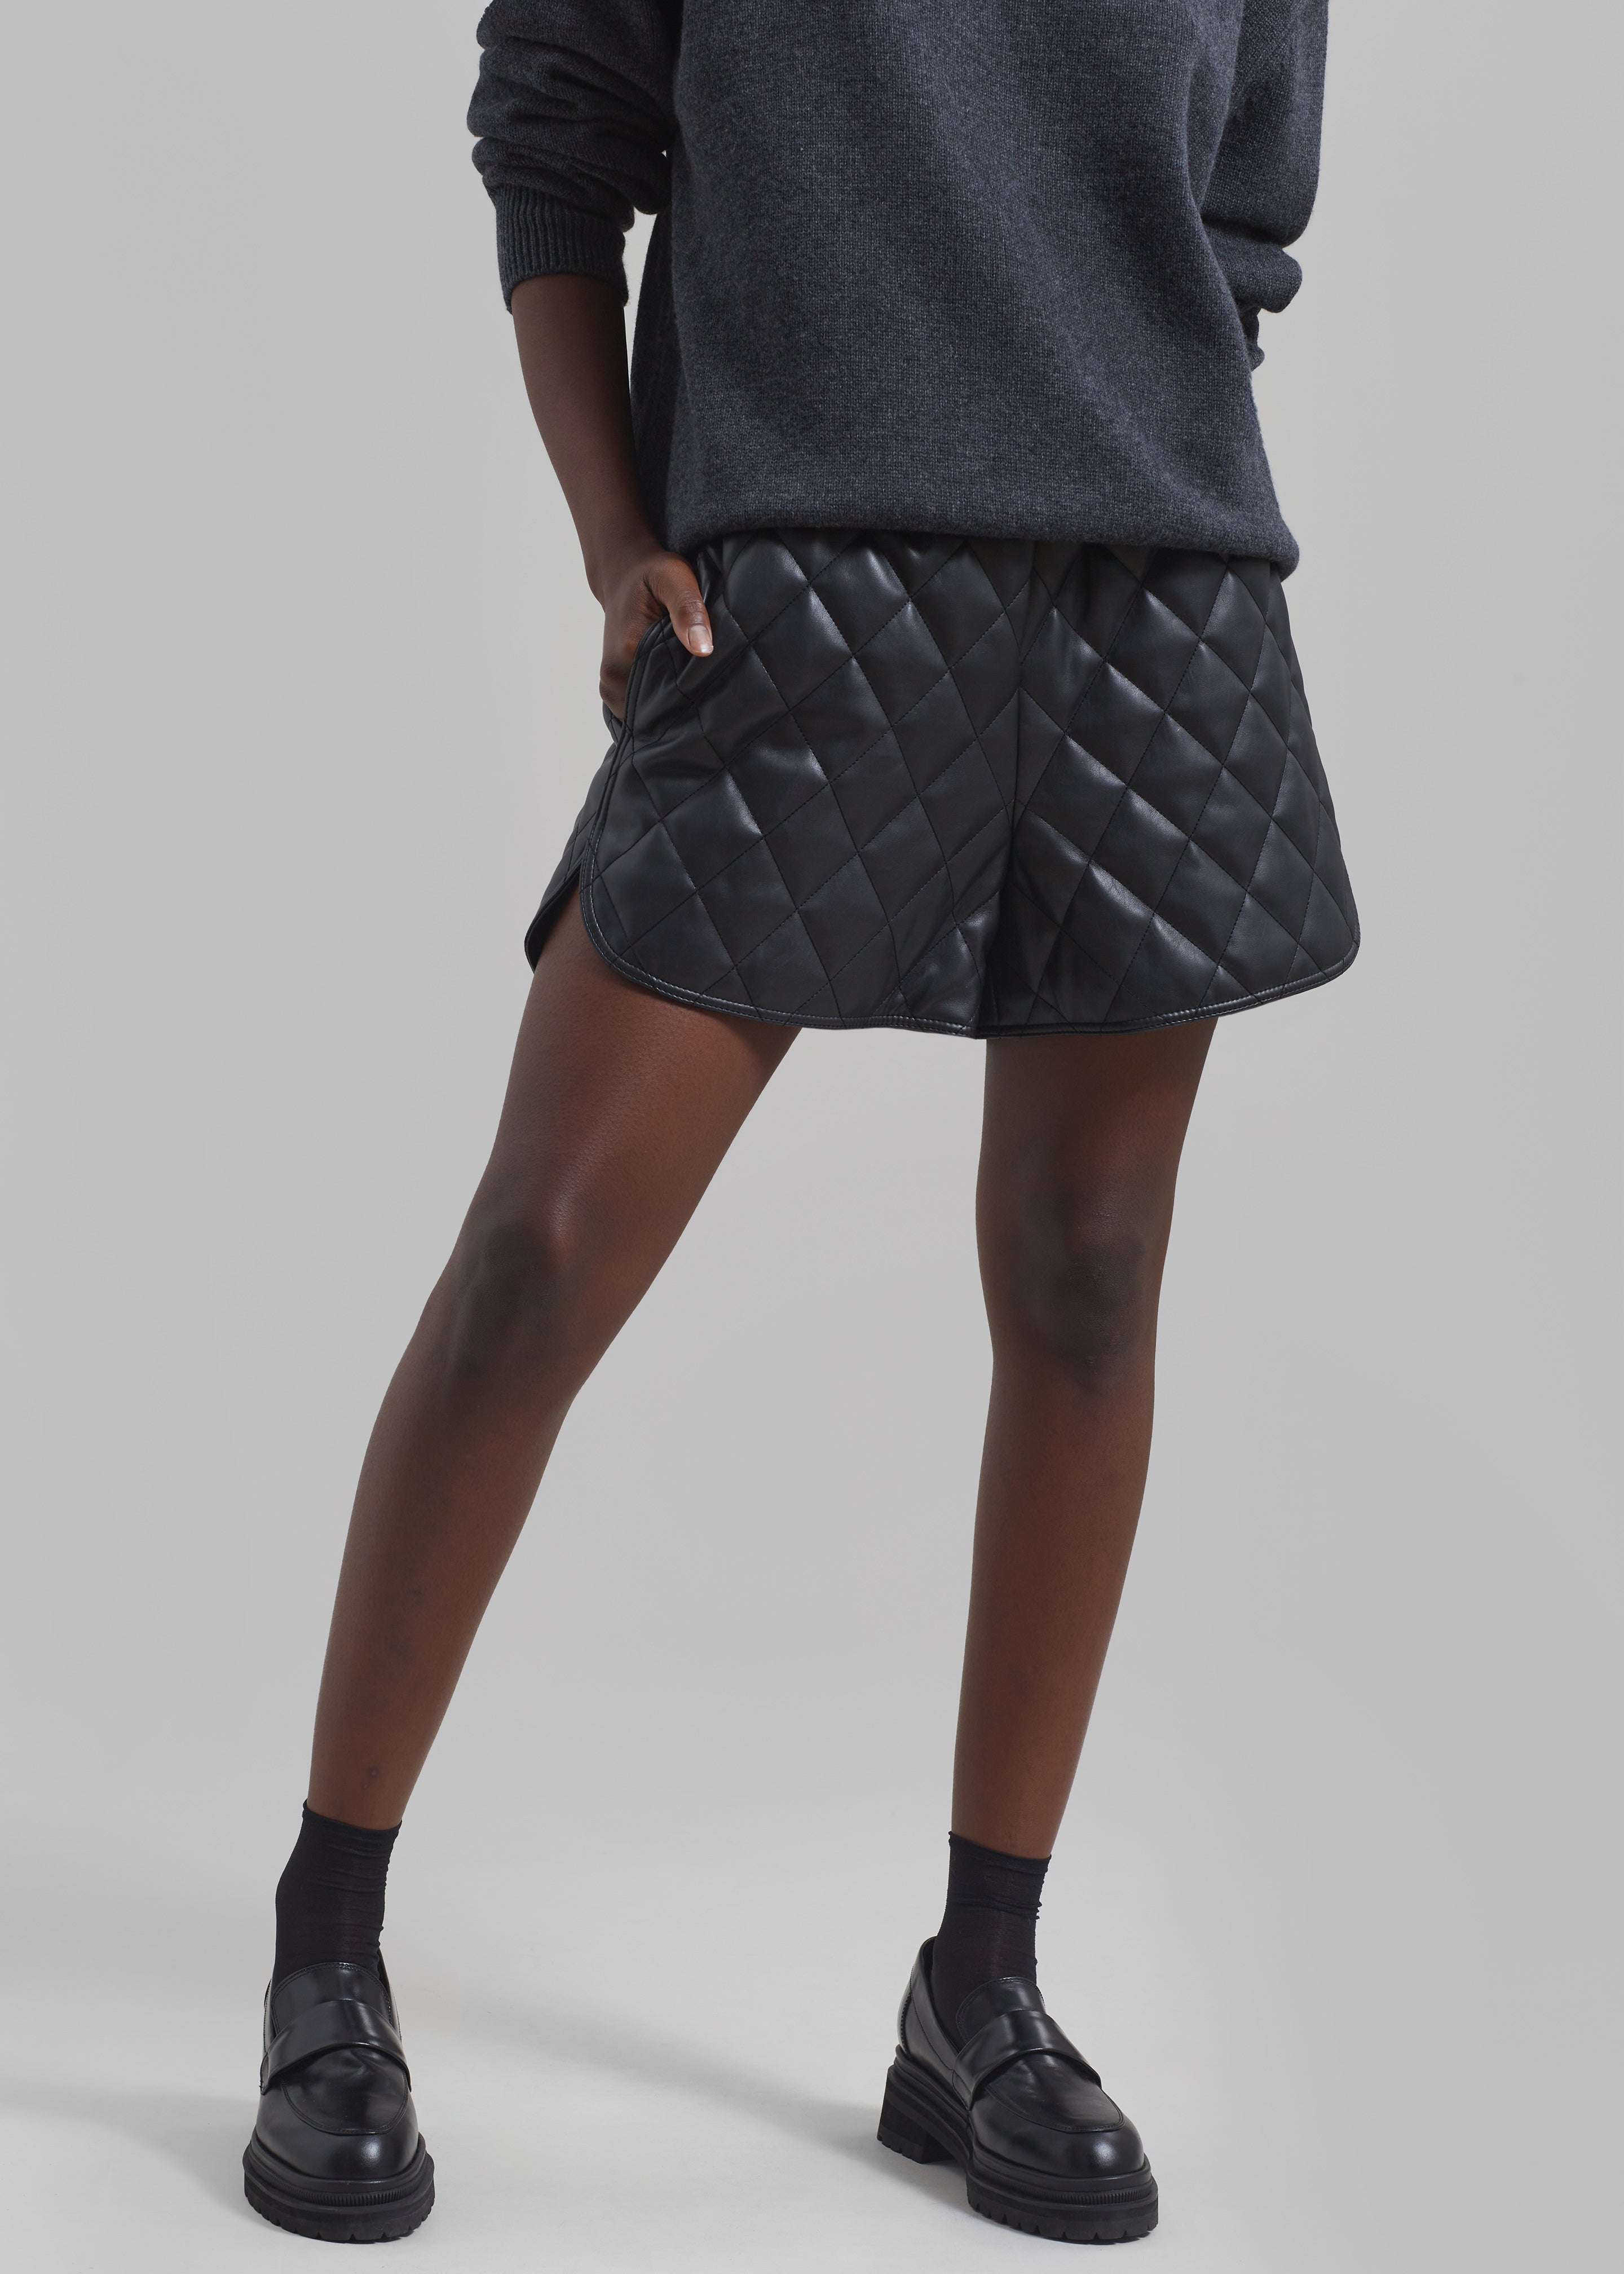 Kingston Faux Leather Quilted Shorts - Black - 1